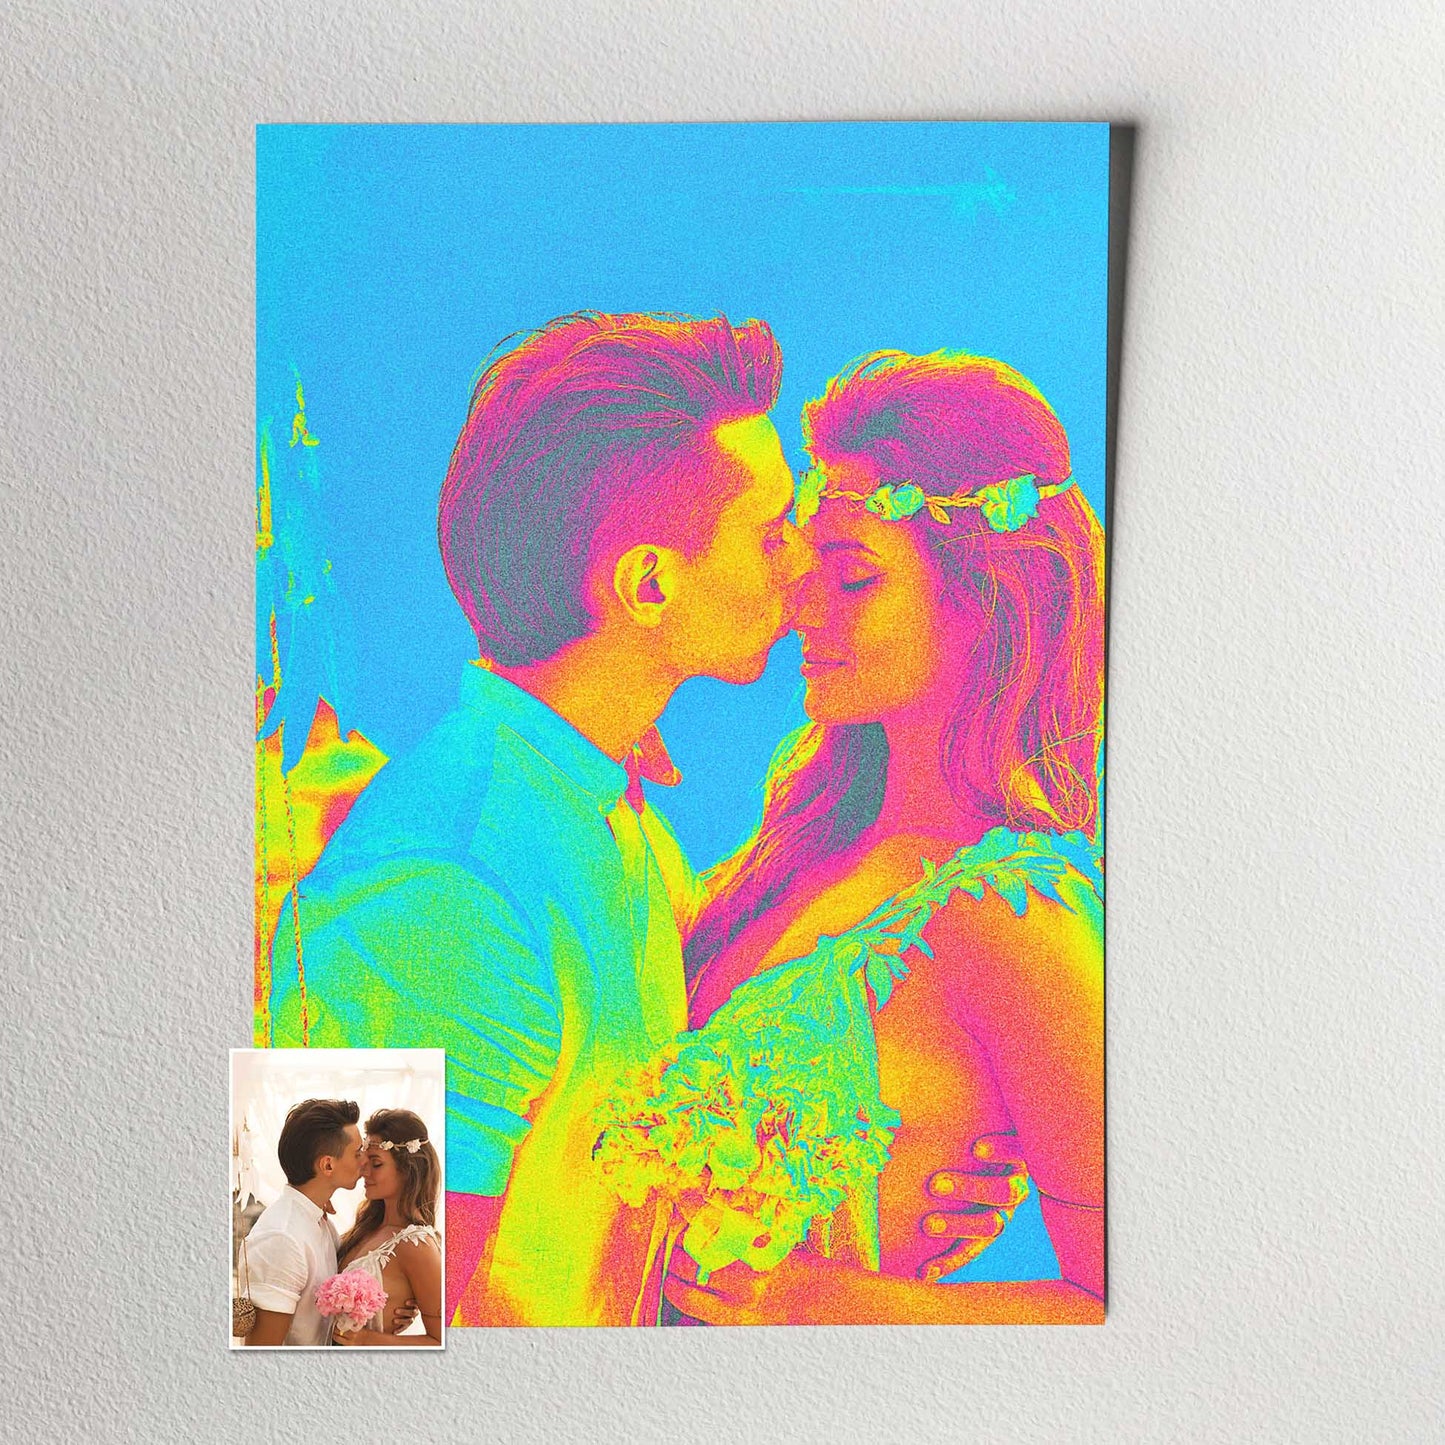 Indulge in the vivid beauty of our Personalised Acid Trip Print. Crafted from your photo, it showcases a neon color effect, with hues of yellow, green, pink, and blue blending harmoniously, cool and vibrant wall art 